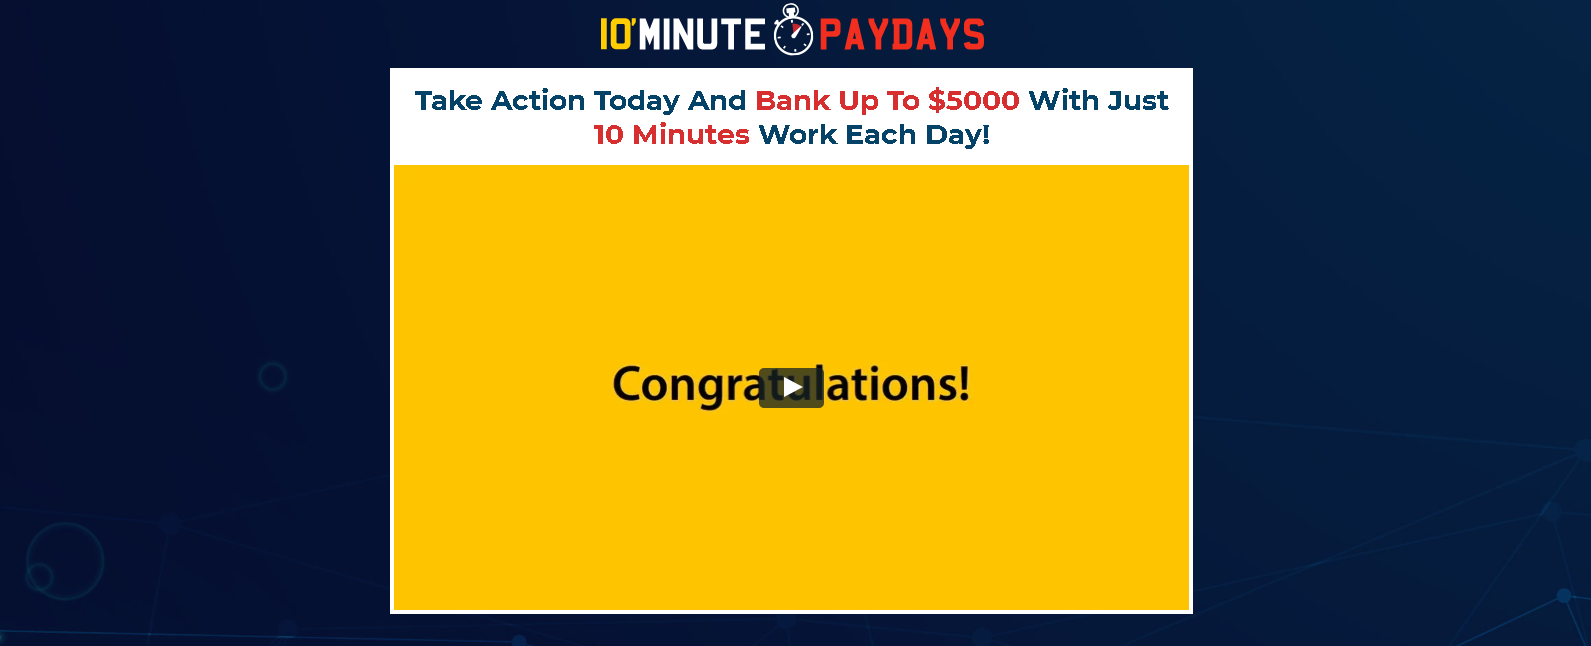 10 Minute Paydays Scam Review